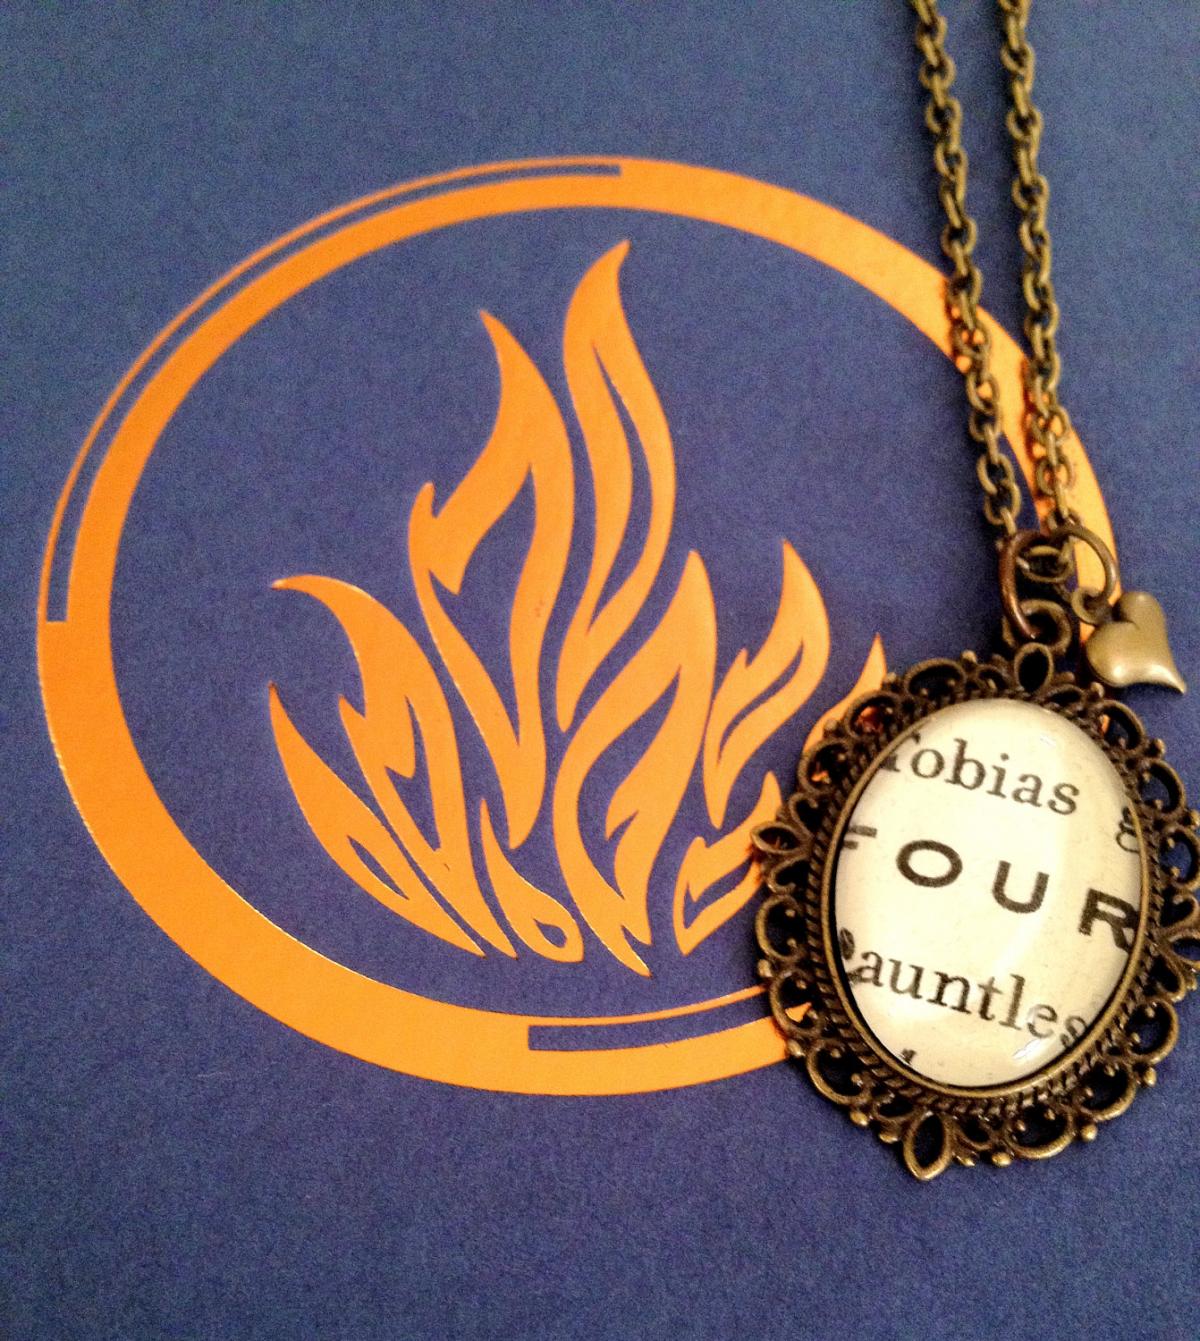 Tobias Four Dauntless Antiqued Bronze Book Page Necklace From Veronica Roth's Divergent